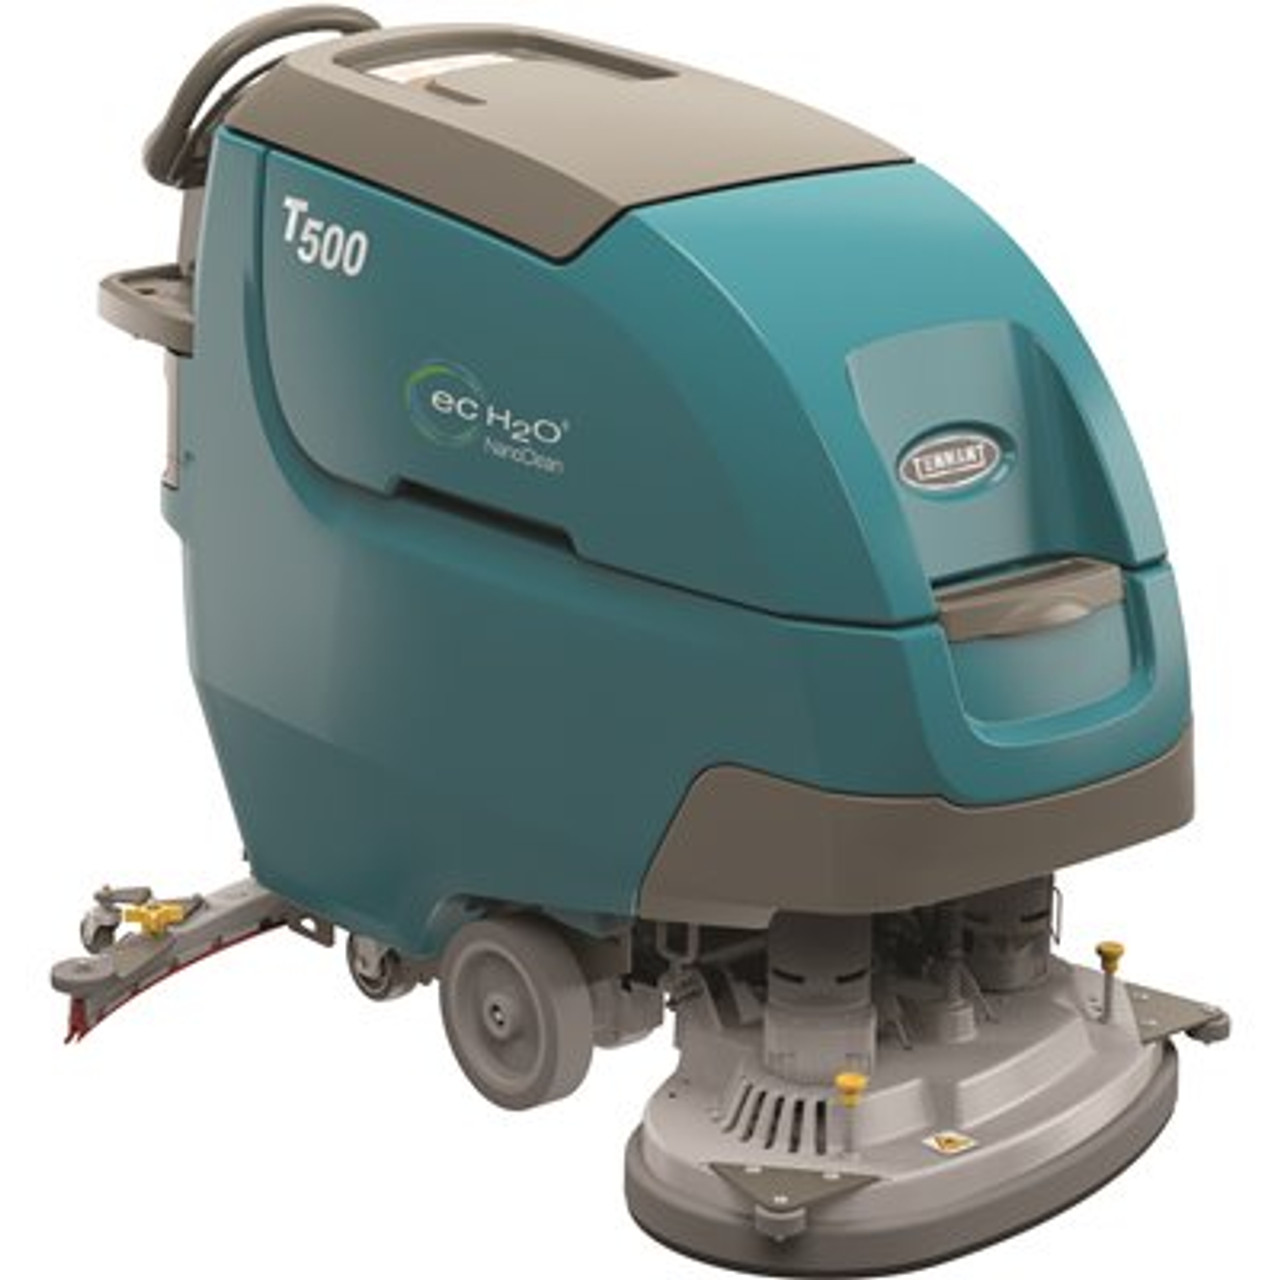 TENNANT T500 WB - Disk Scrubber, 28", Pro-Control Panel, 225AH Battery, Smart-Fill, Conventional, On-Board Charger, Auto Fill